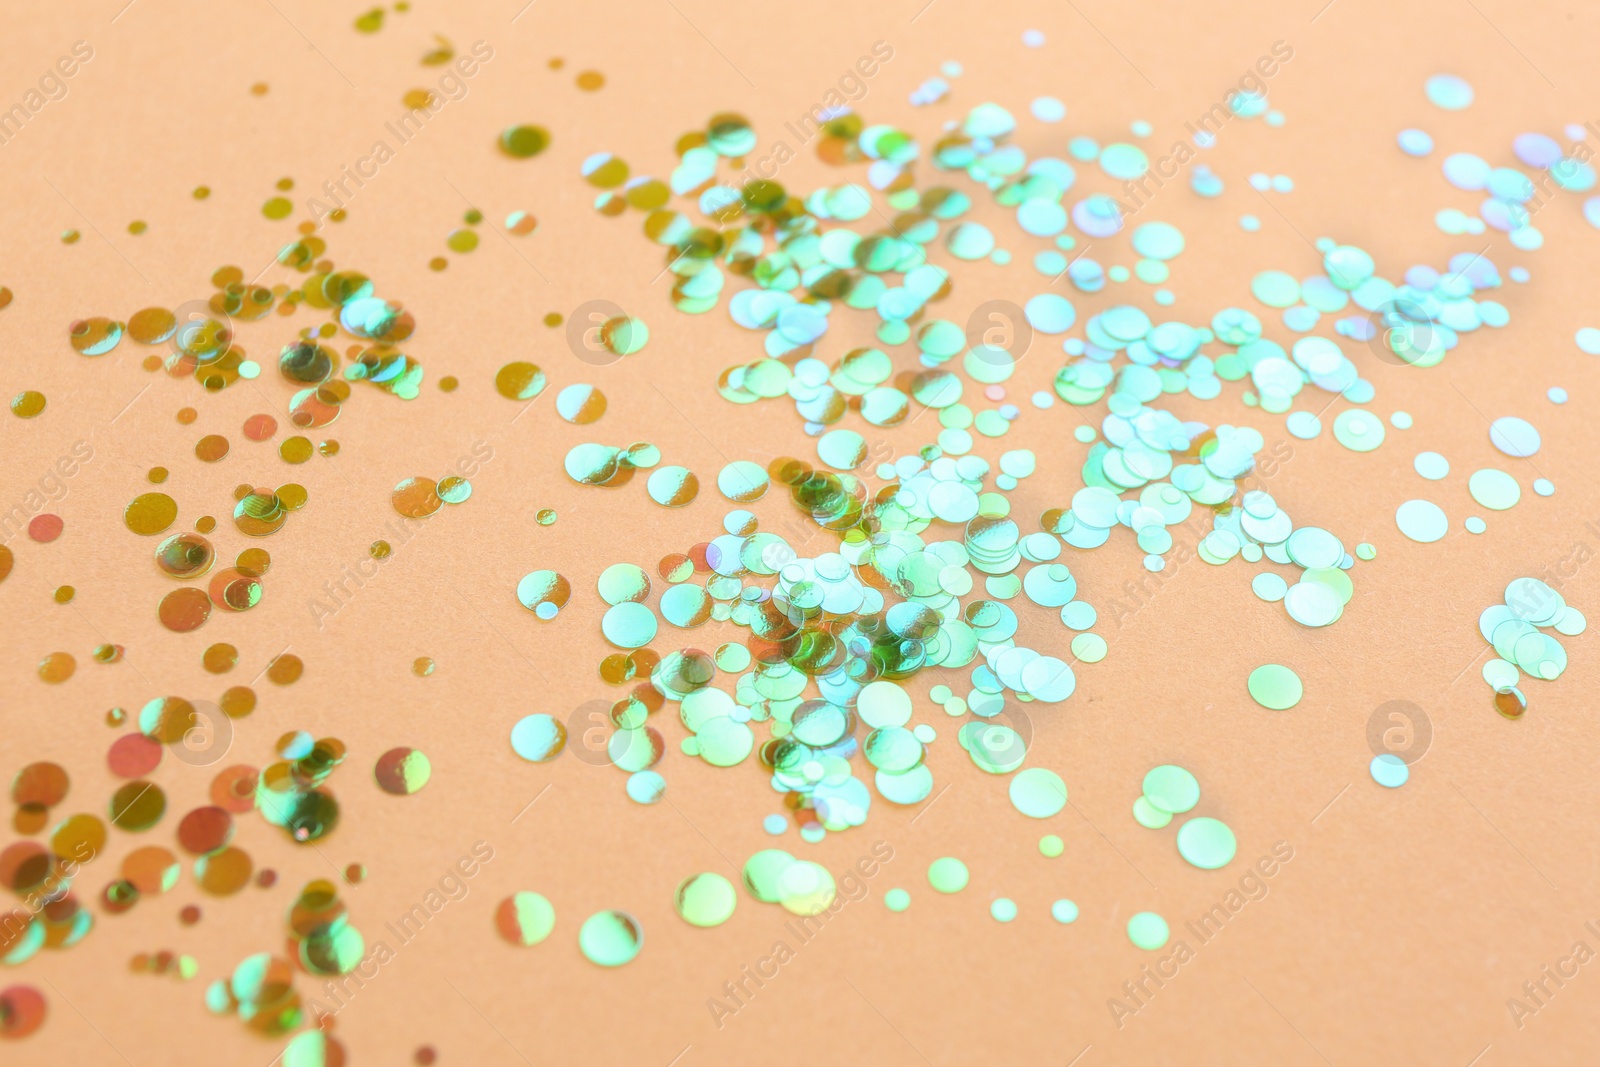 Photo of Shiny bright glitter scattered on beige background